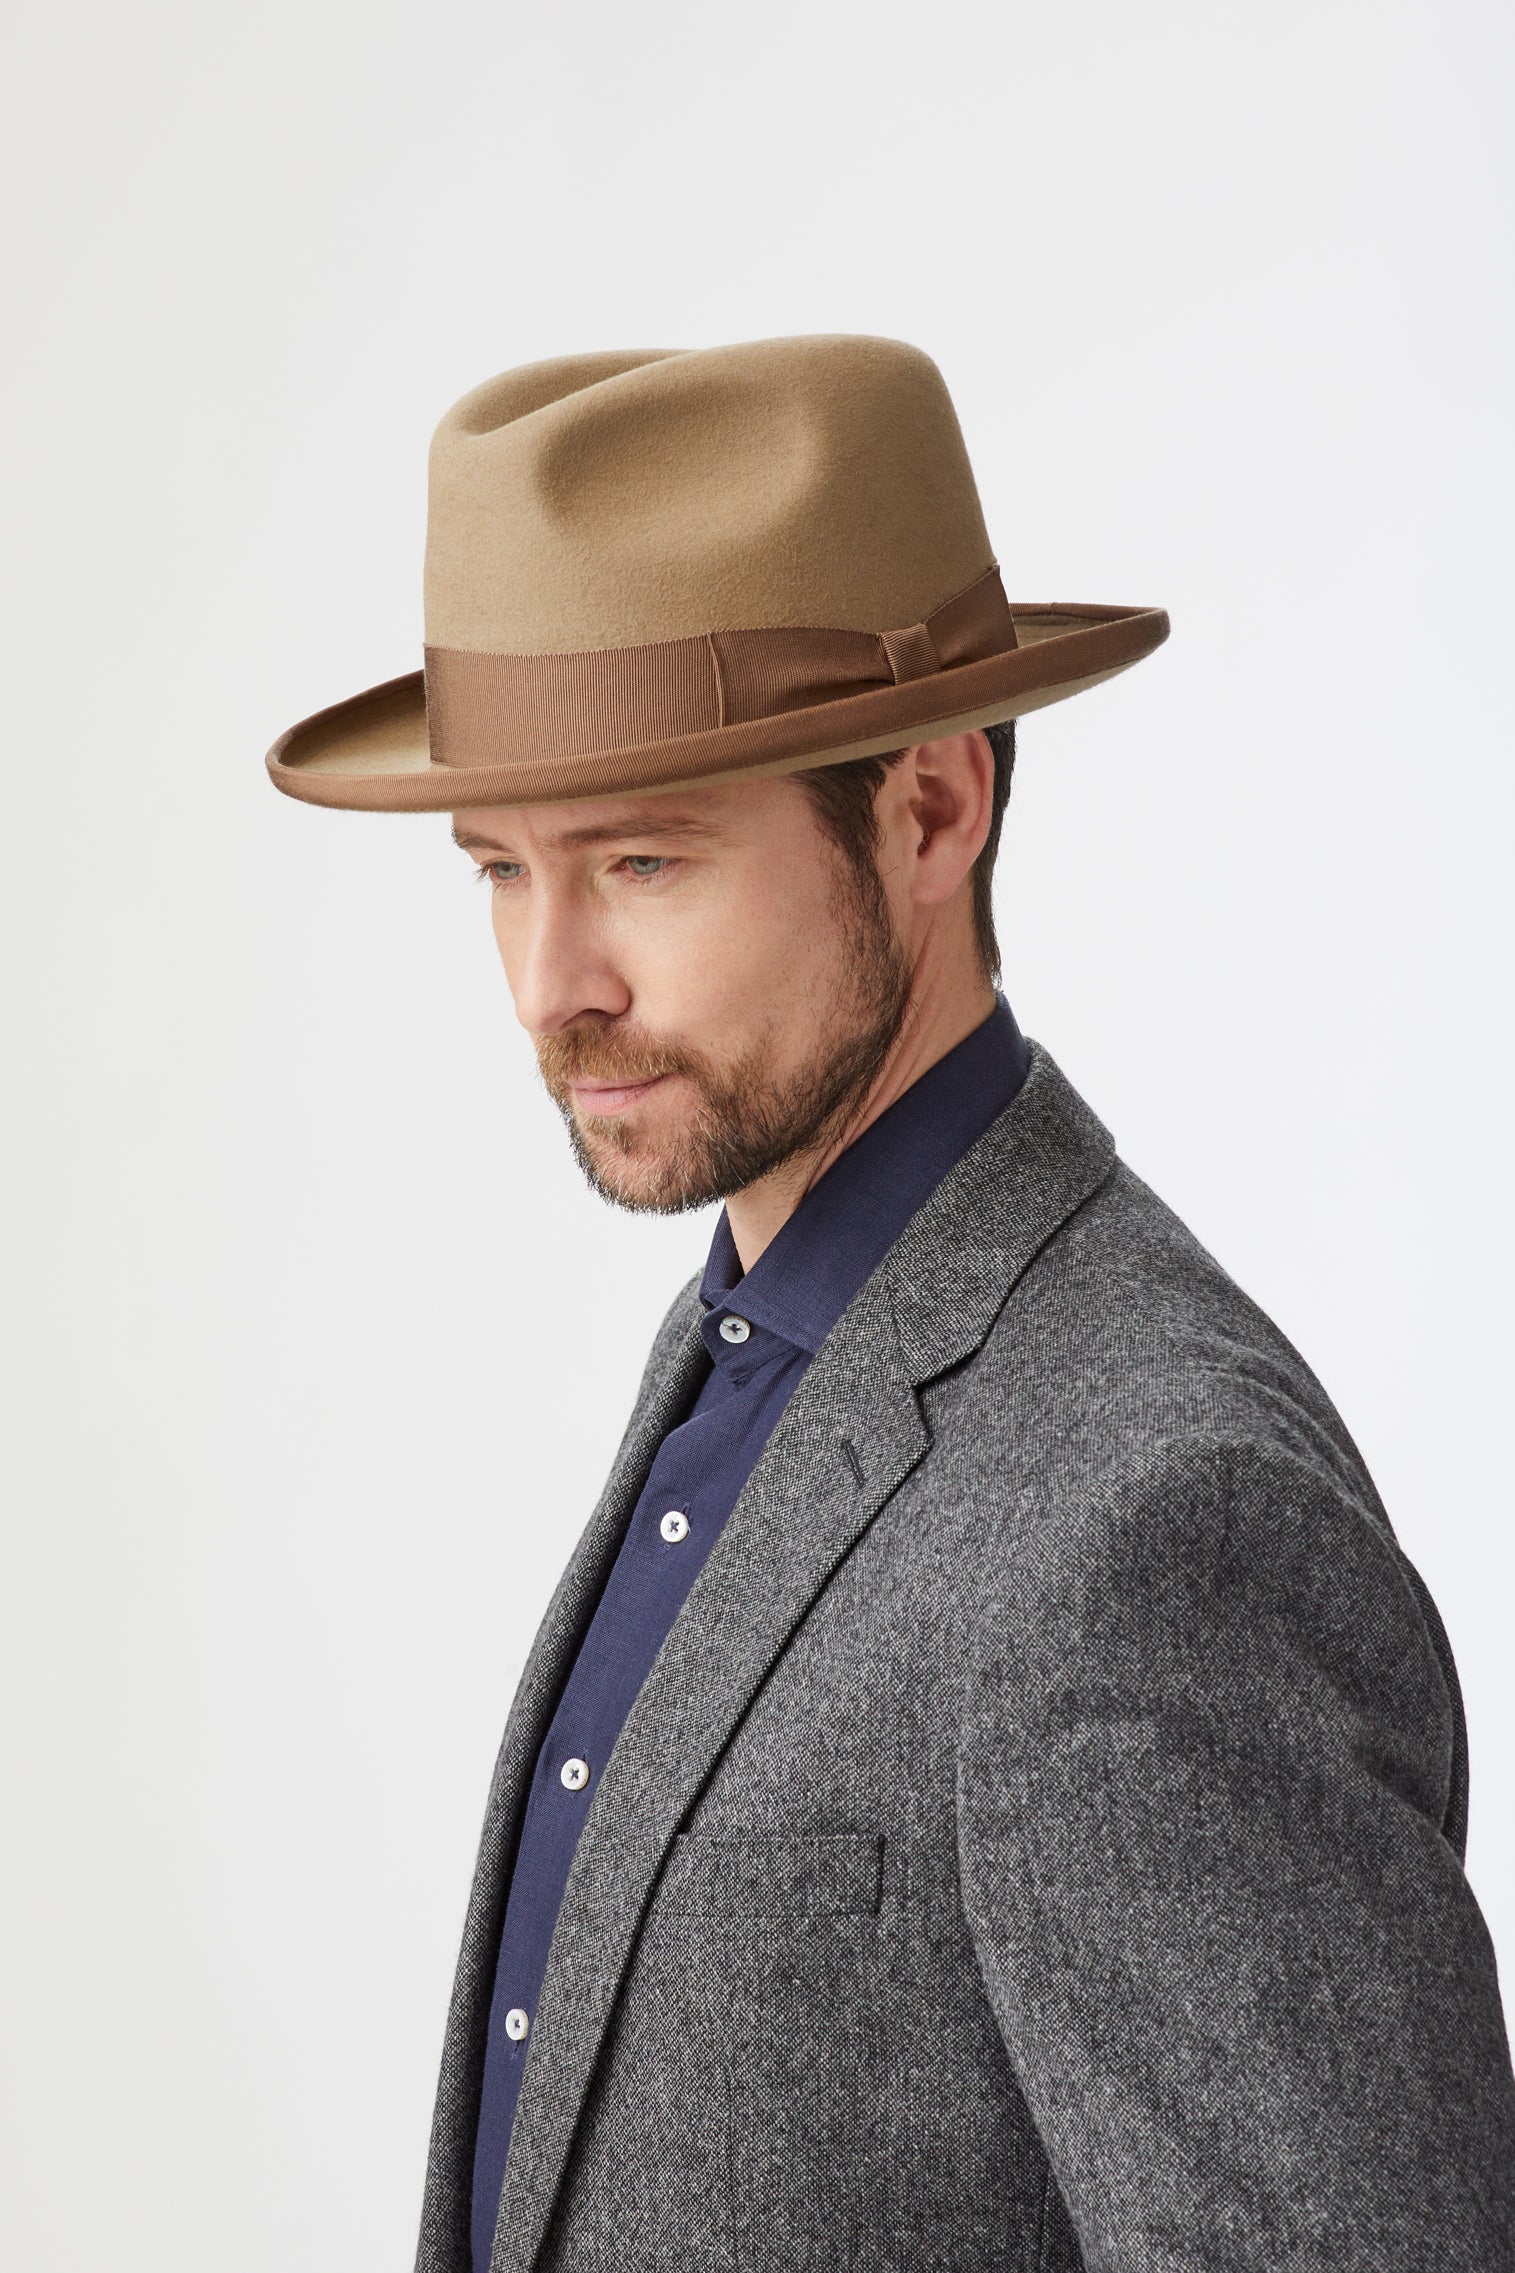 Mens Hats - Luxury Hats for Men - Lock & Co. Hatters UK Tagged 